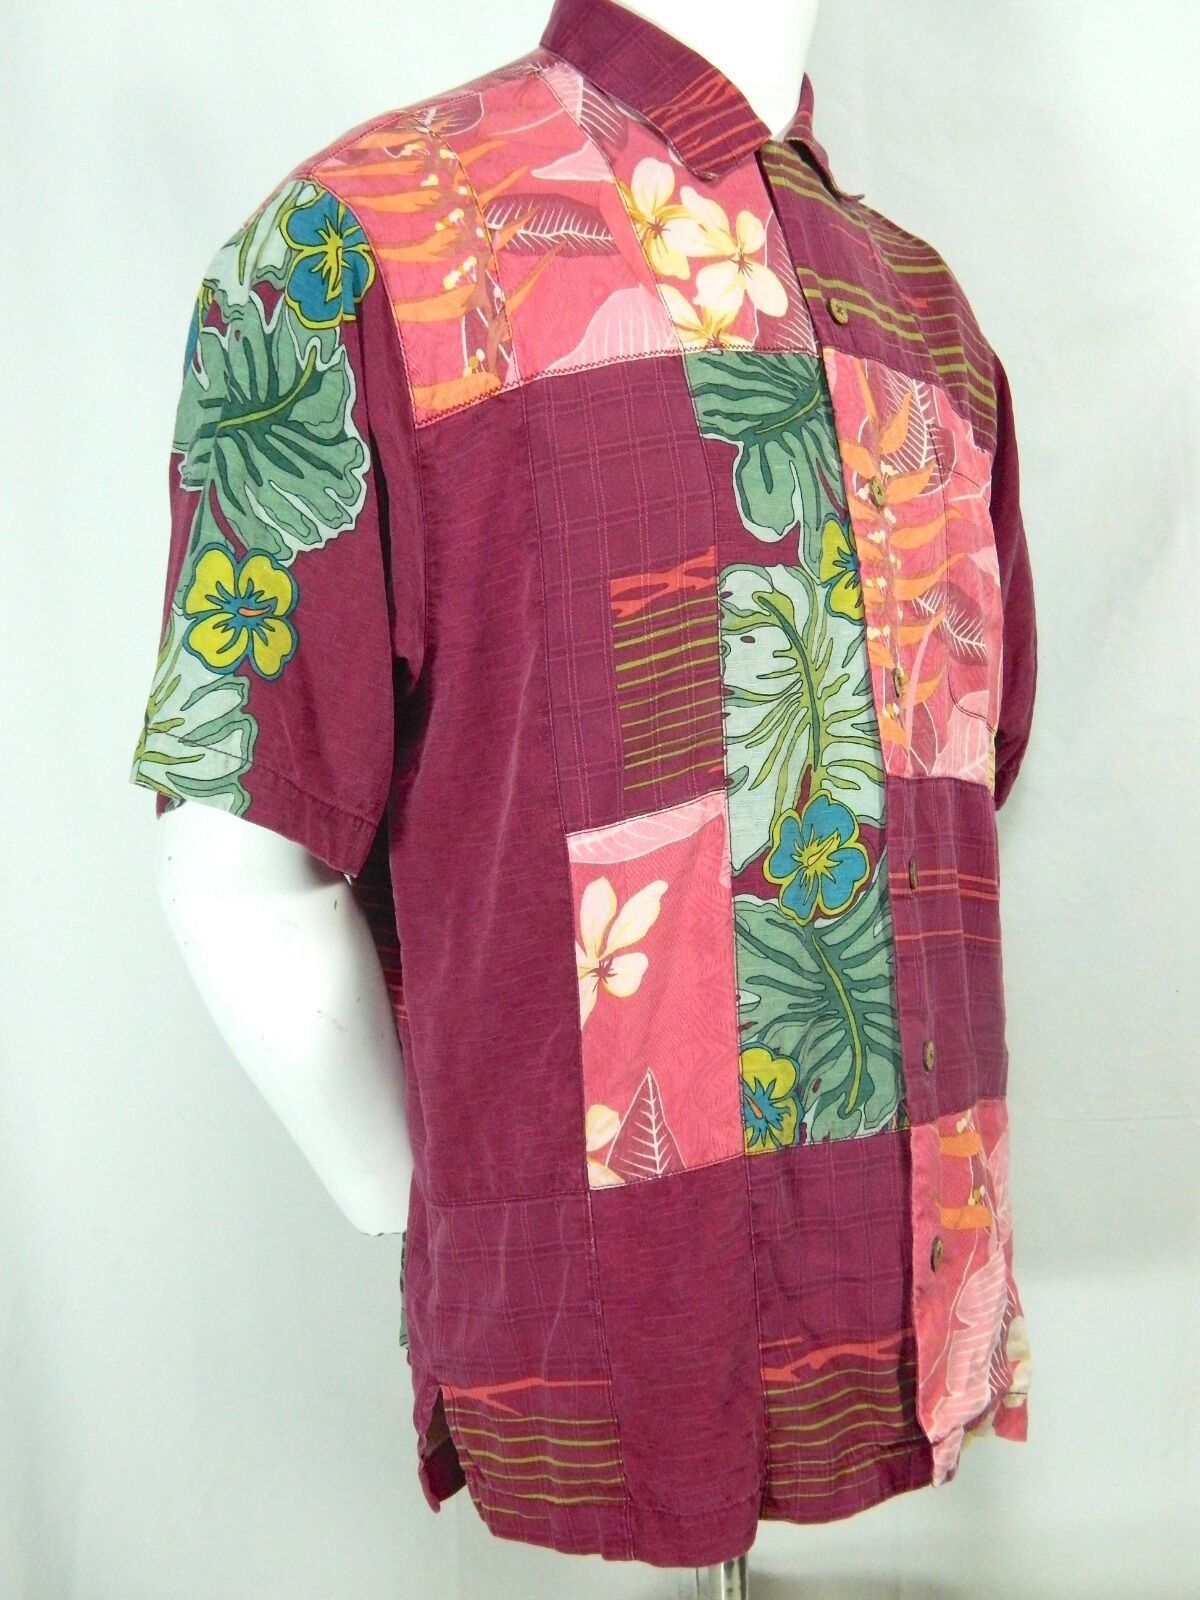 Primary image for Mens Tommy Bahama Silk Hawaiian Shirt M Woven Tropical Design Copyrighted Print